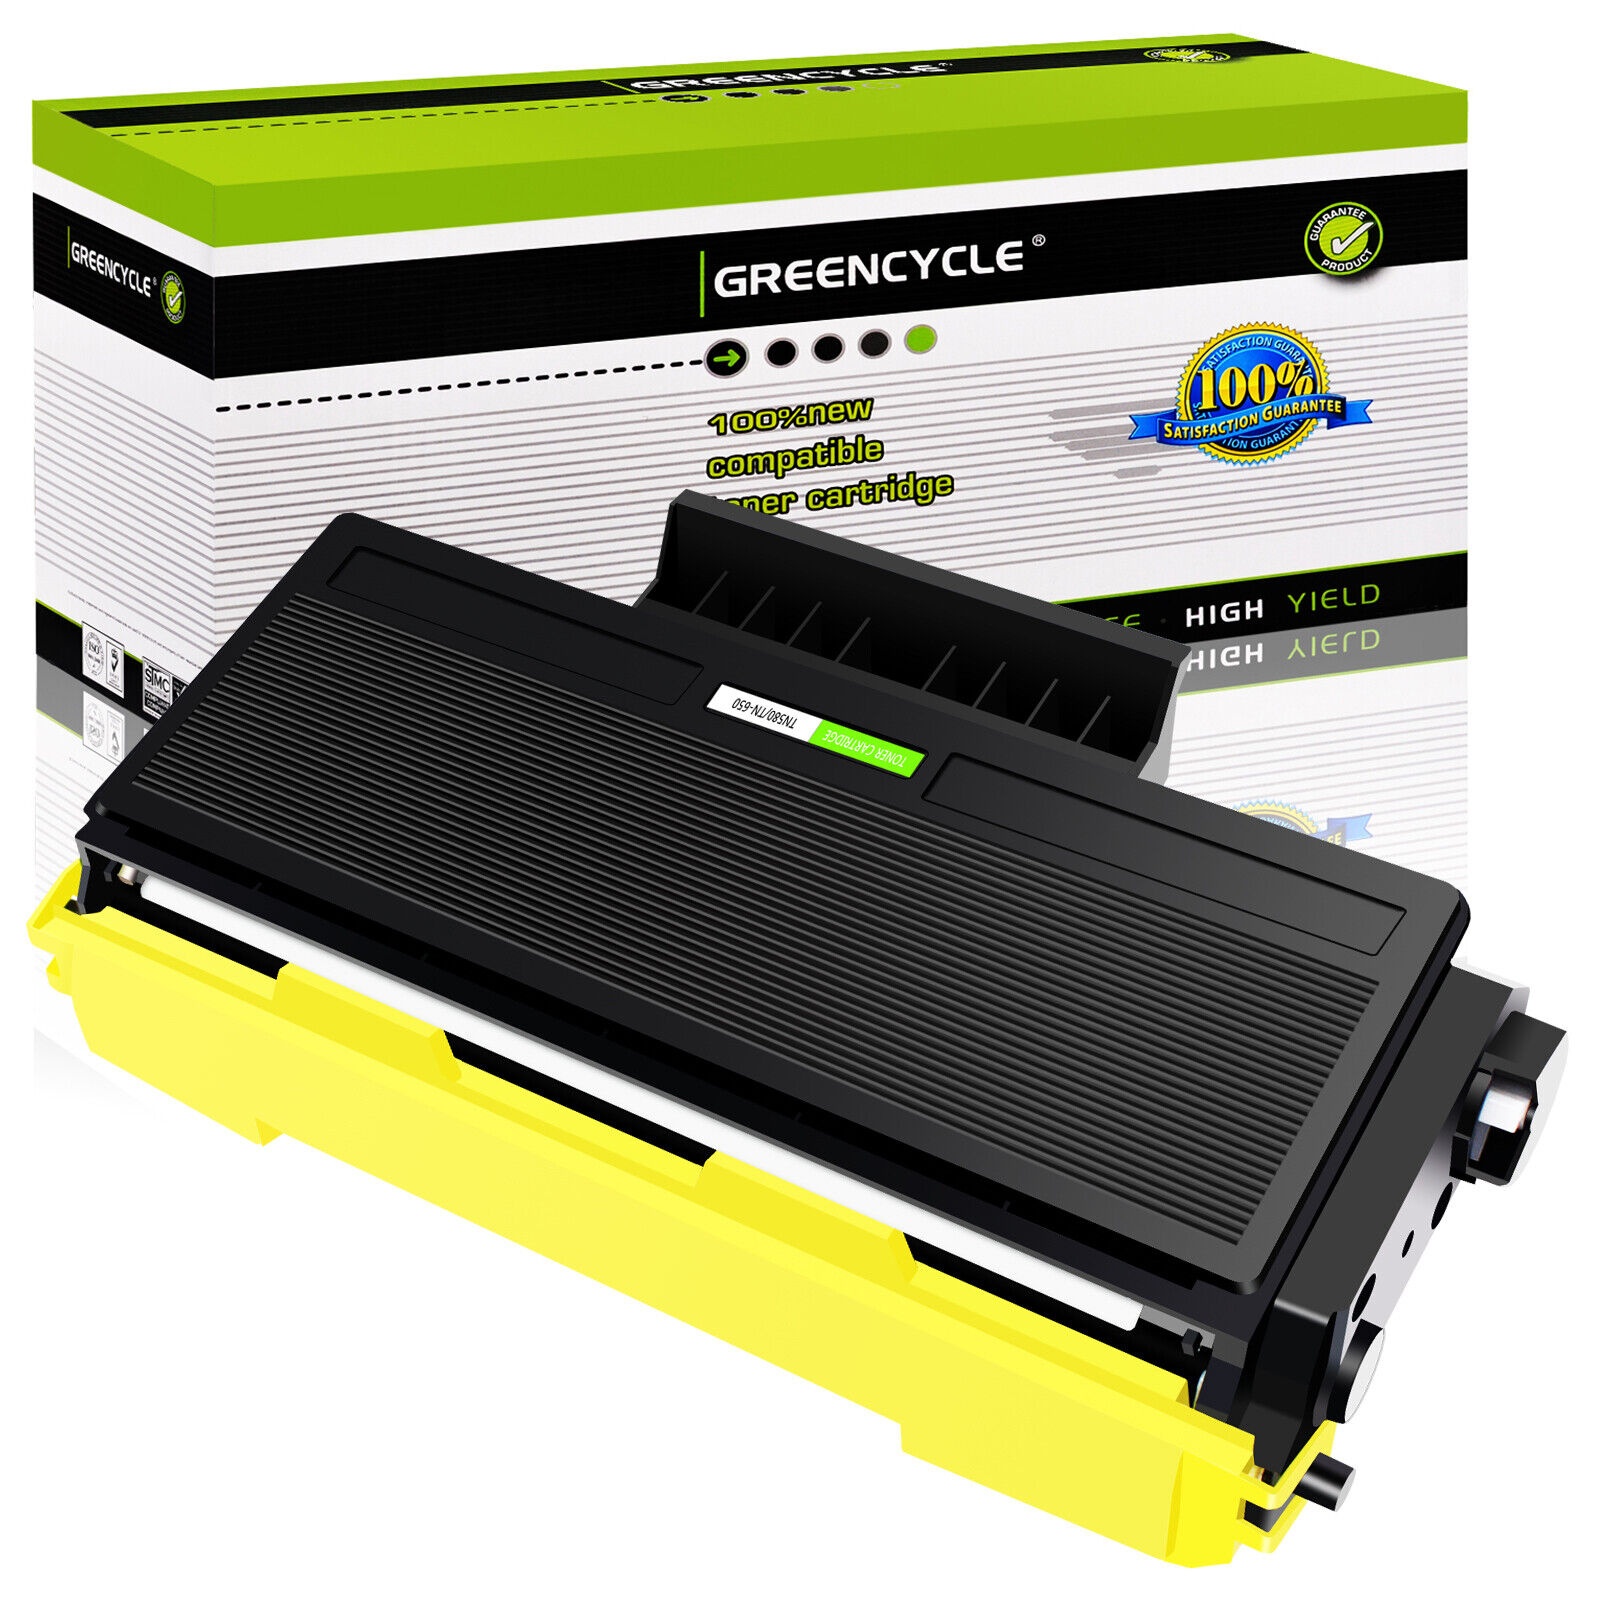 1PK TN580 Toner cartridges Compatible For Brother MFC-8470DN MFC-8670DN DCP-8065